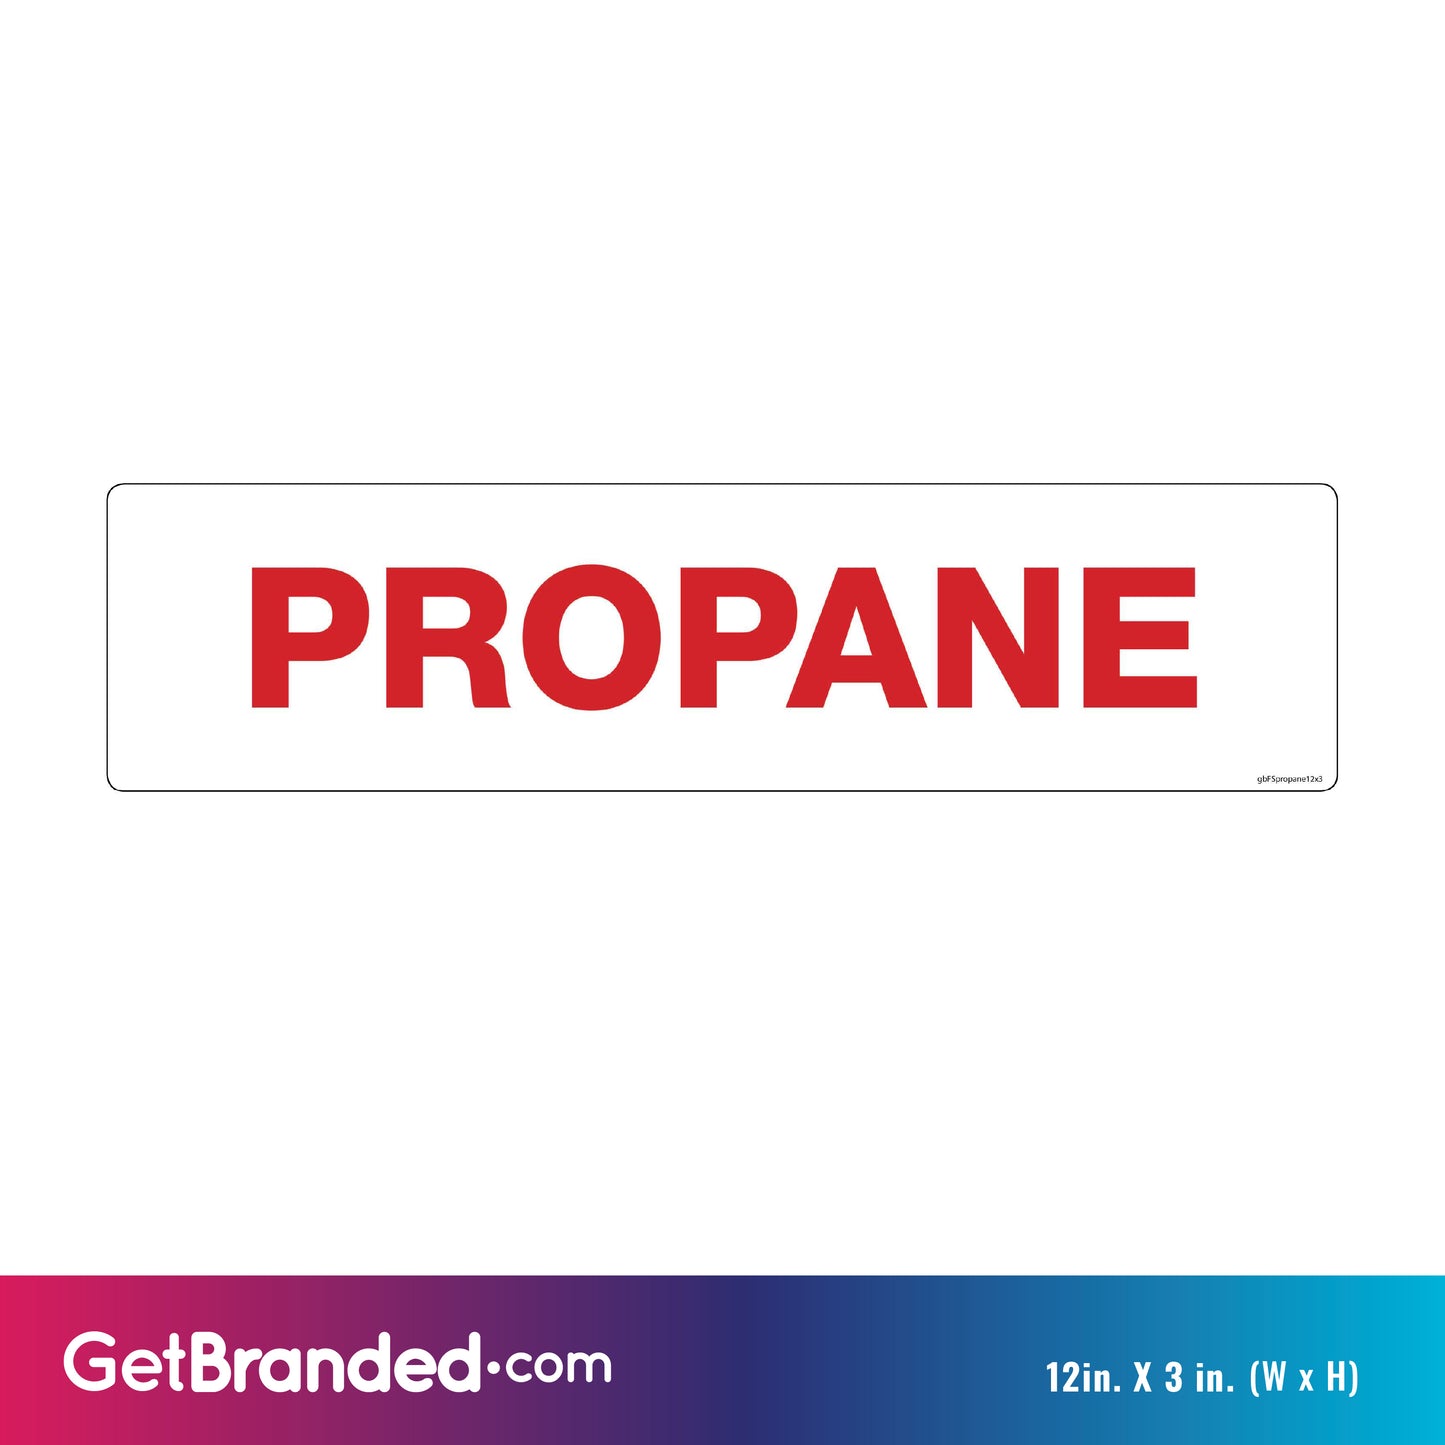 Propane Decal size guide.